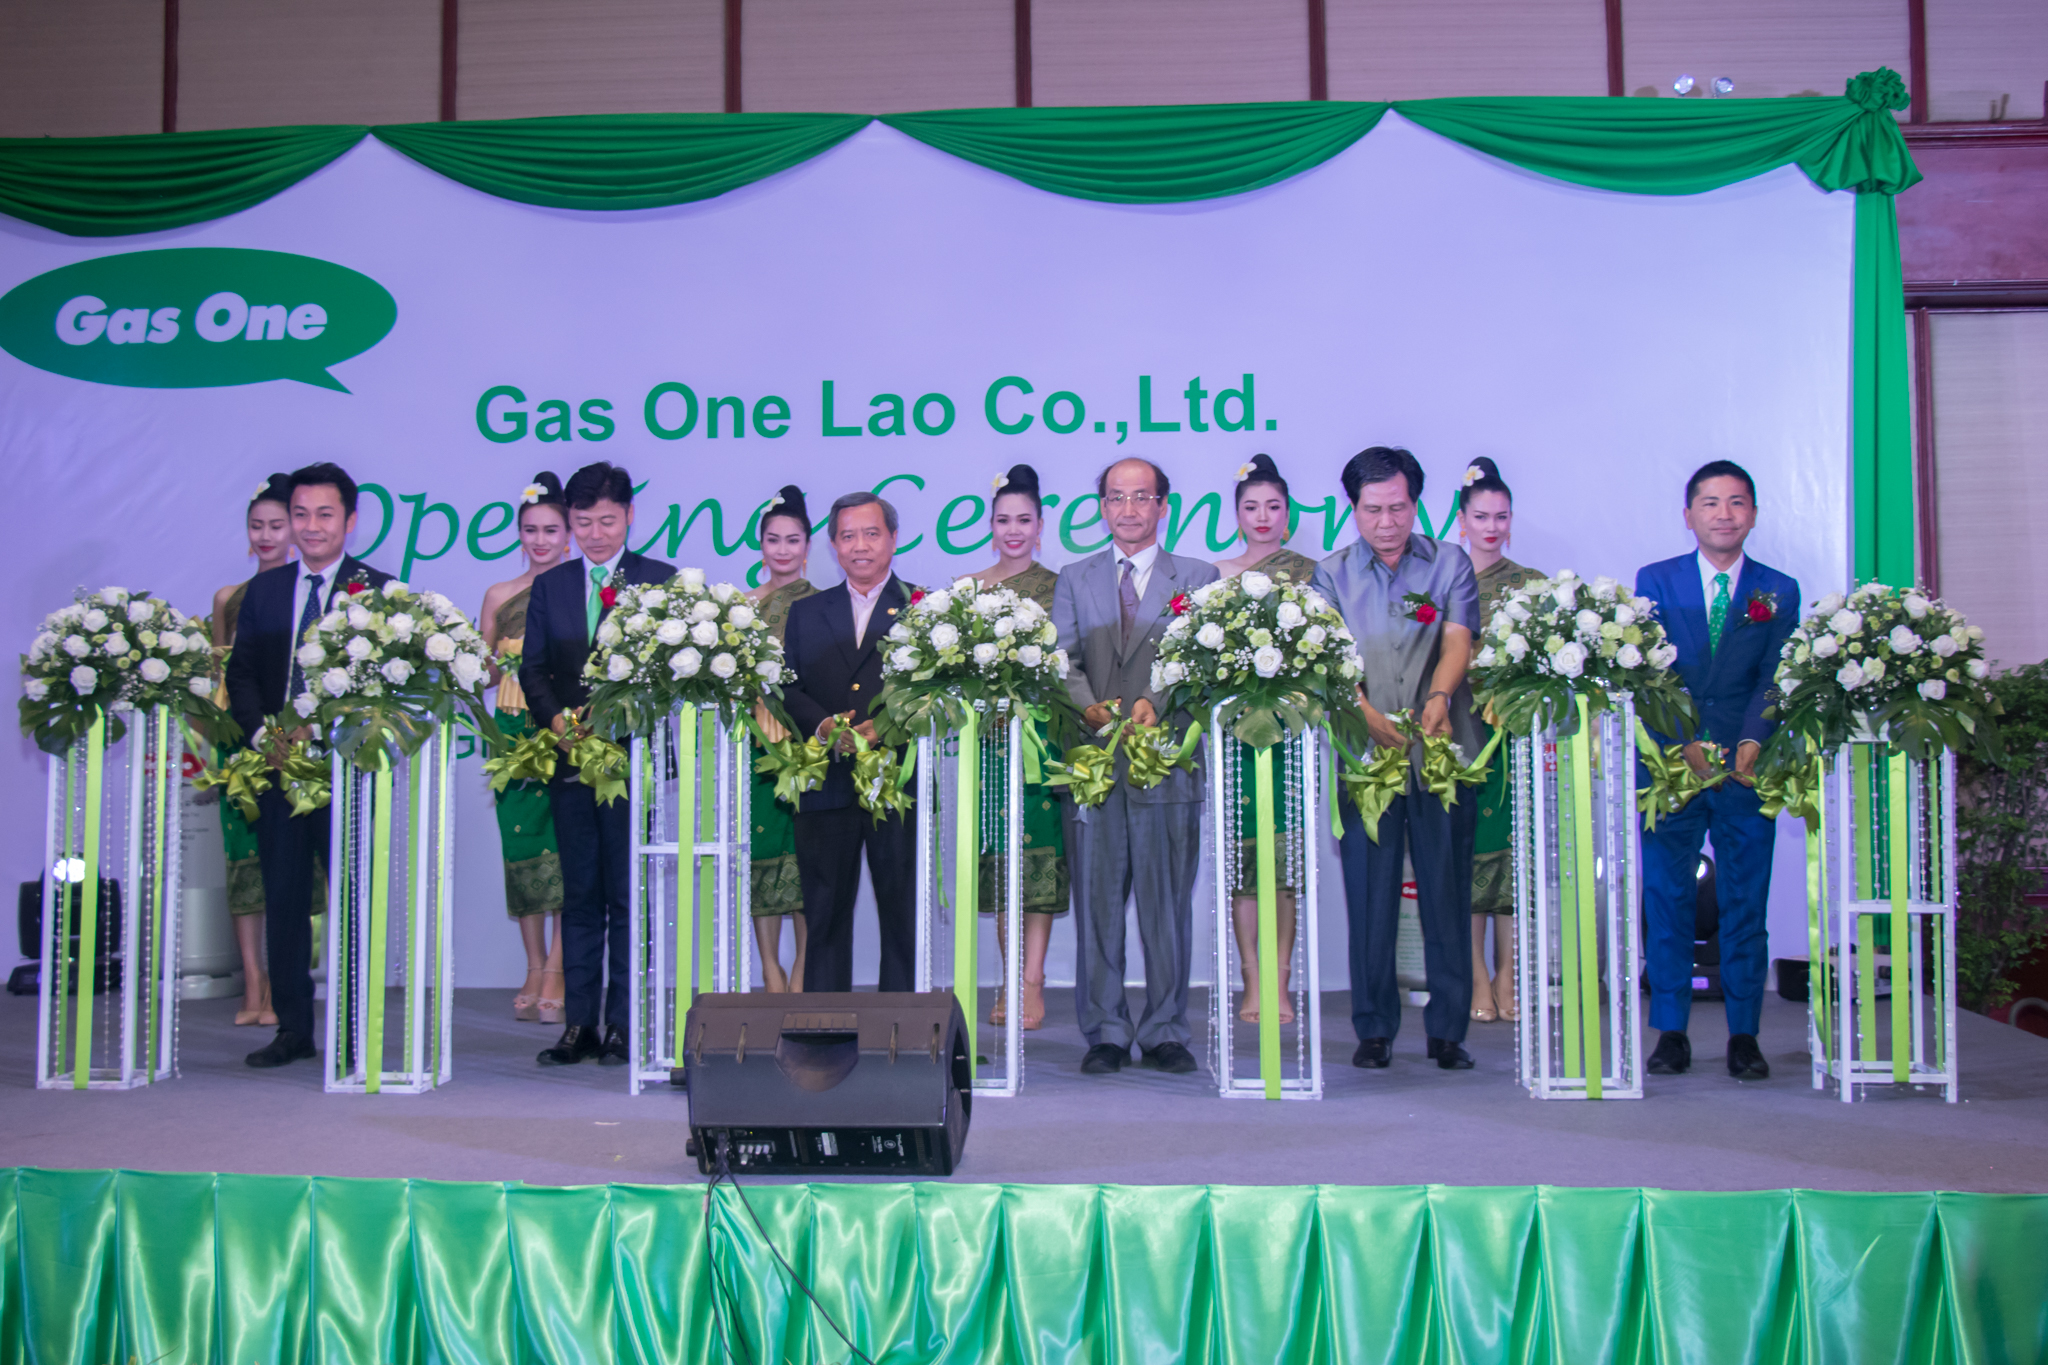 Grand Opening Ceremony of Gas One Lao Co., Ltd. (June 2019)